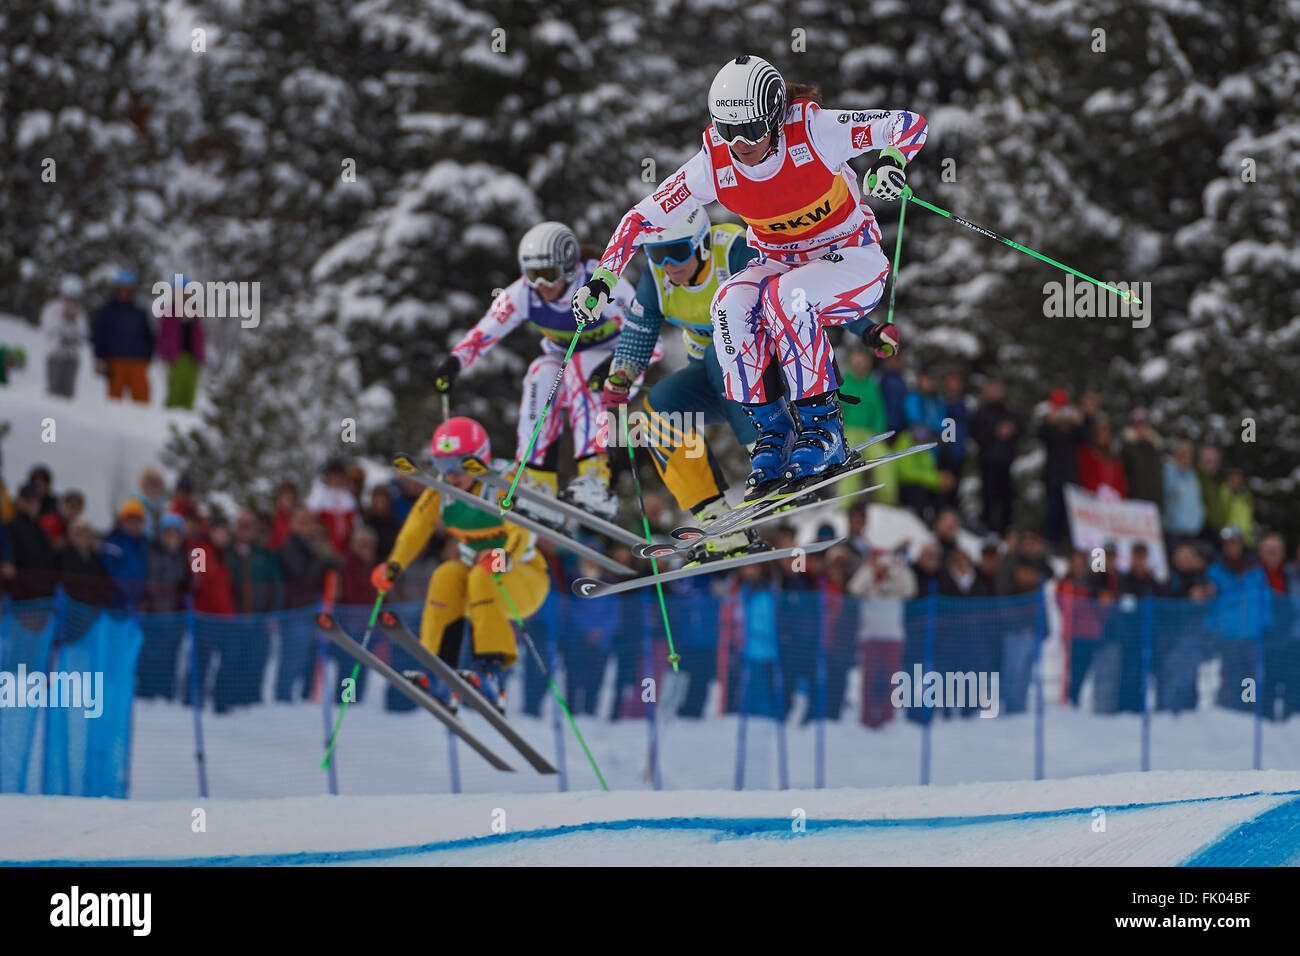 Arosa, Switzerland. 4th March, 2016. Alizee Baron (FRA), Sami Kennedy-Sim (AUS), Ophelie David (FRA) and Heidi Zacher (GER) compete during their Quarterfinal heat at the Audi Ski Cross World Cup in Arosa. Credit:  Rolf Simeon/Alamy Live News. Stock Photo